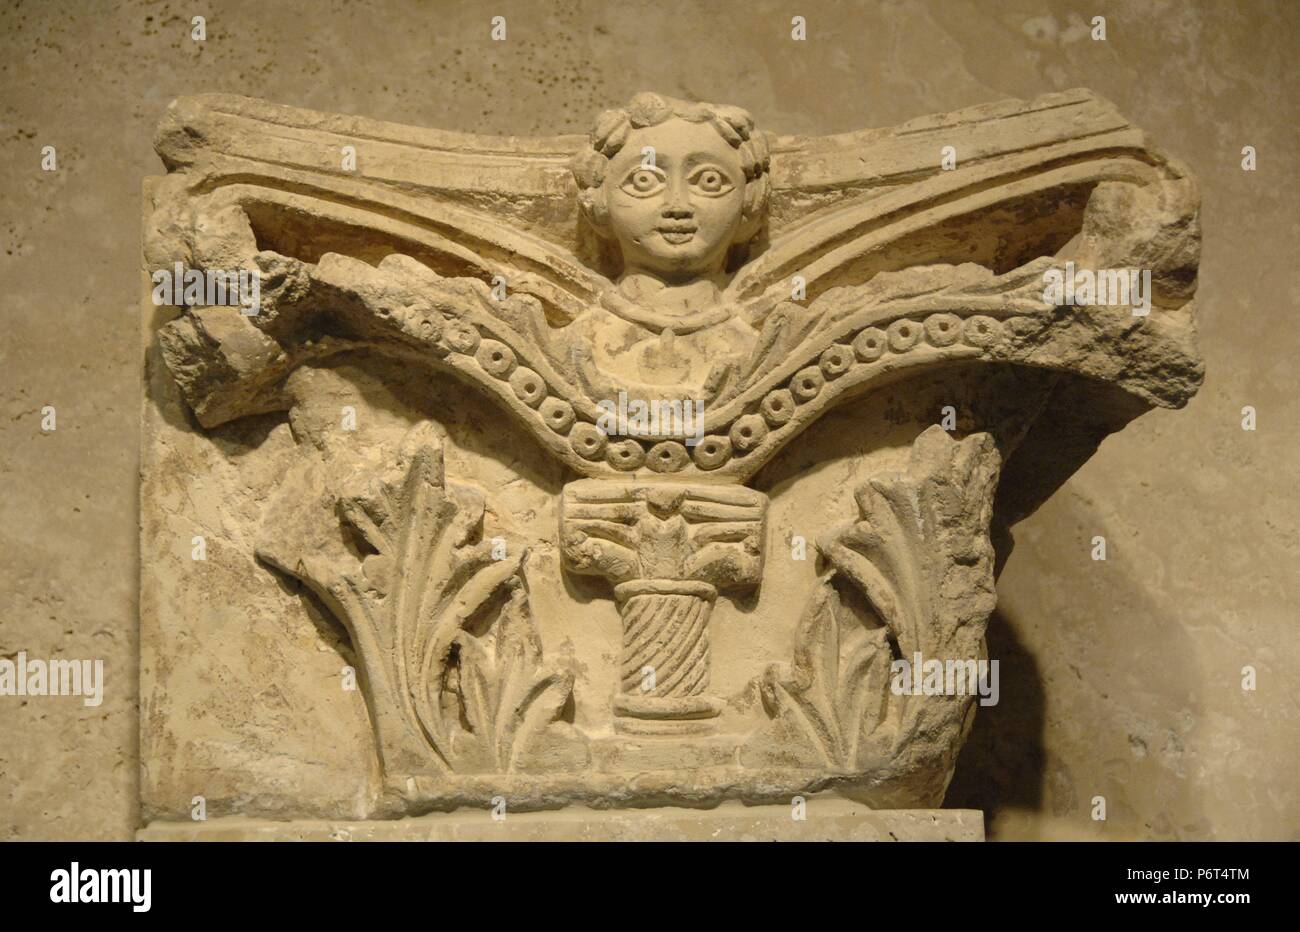 Byzantine art. Capital decorated with a relief of a woman. Byzantine Museum. Athens. Greece. Stock Photo